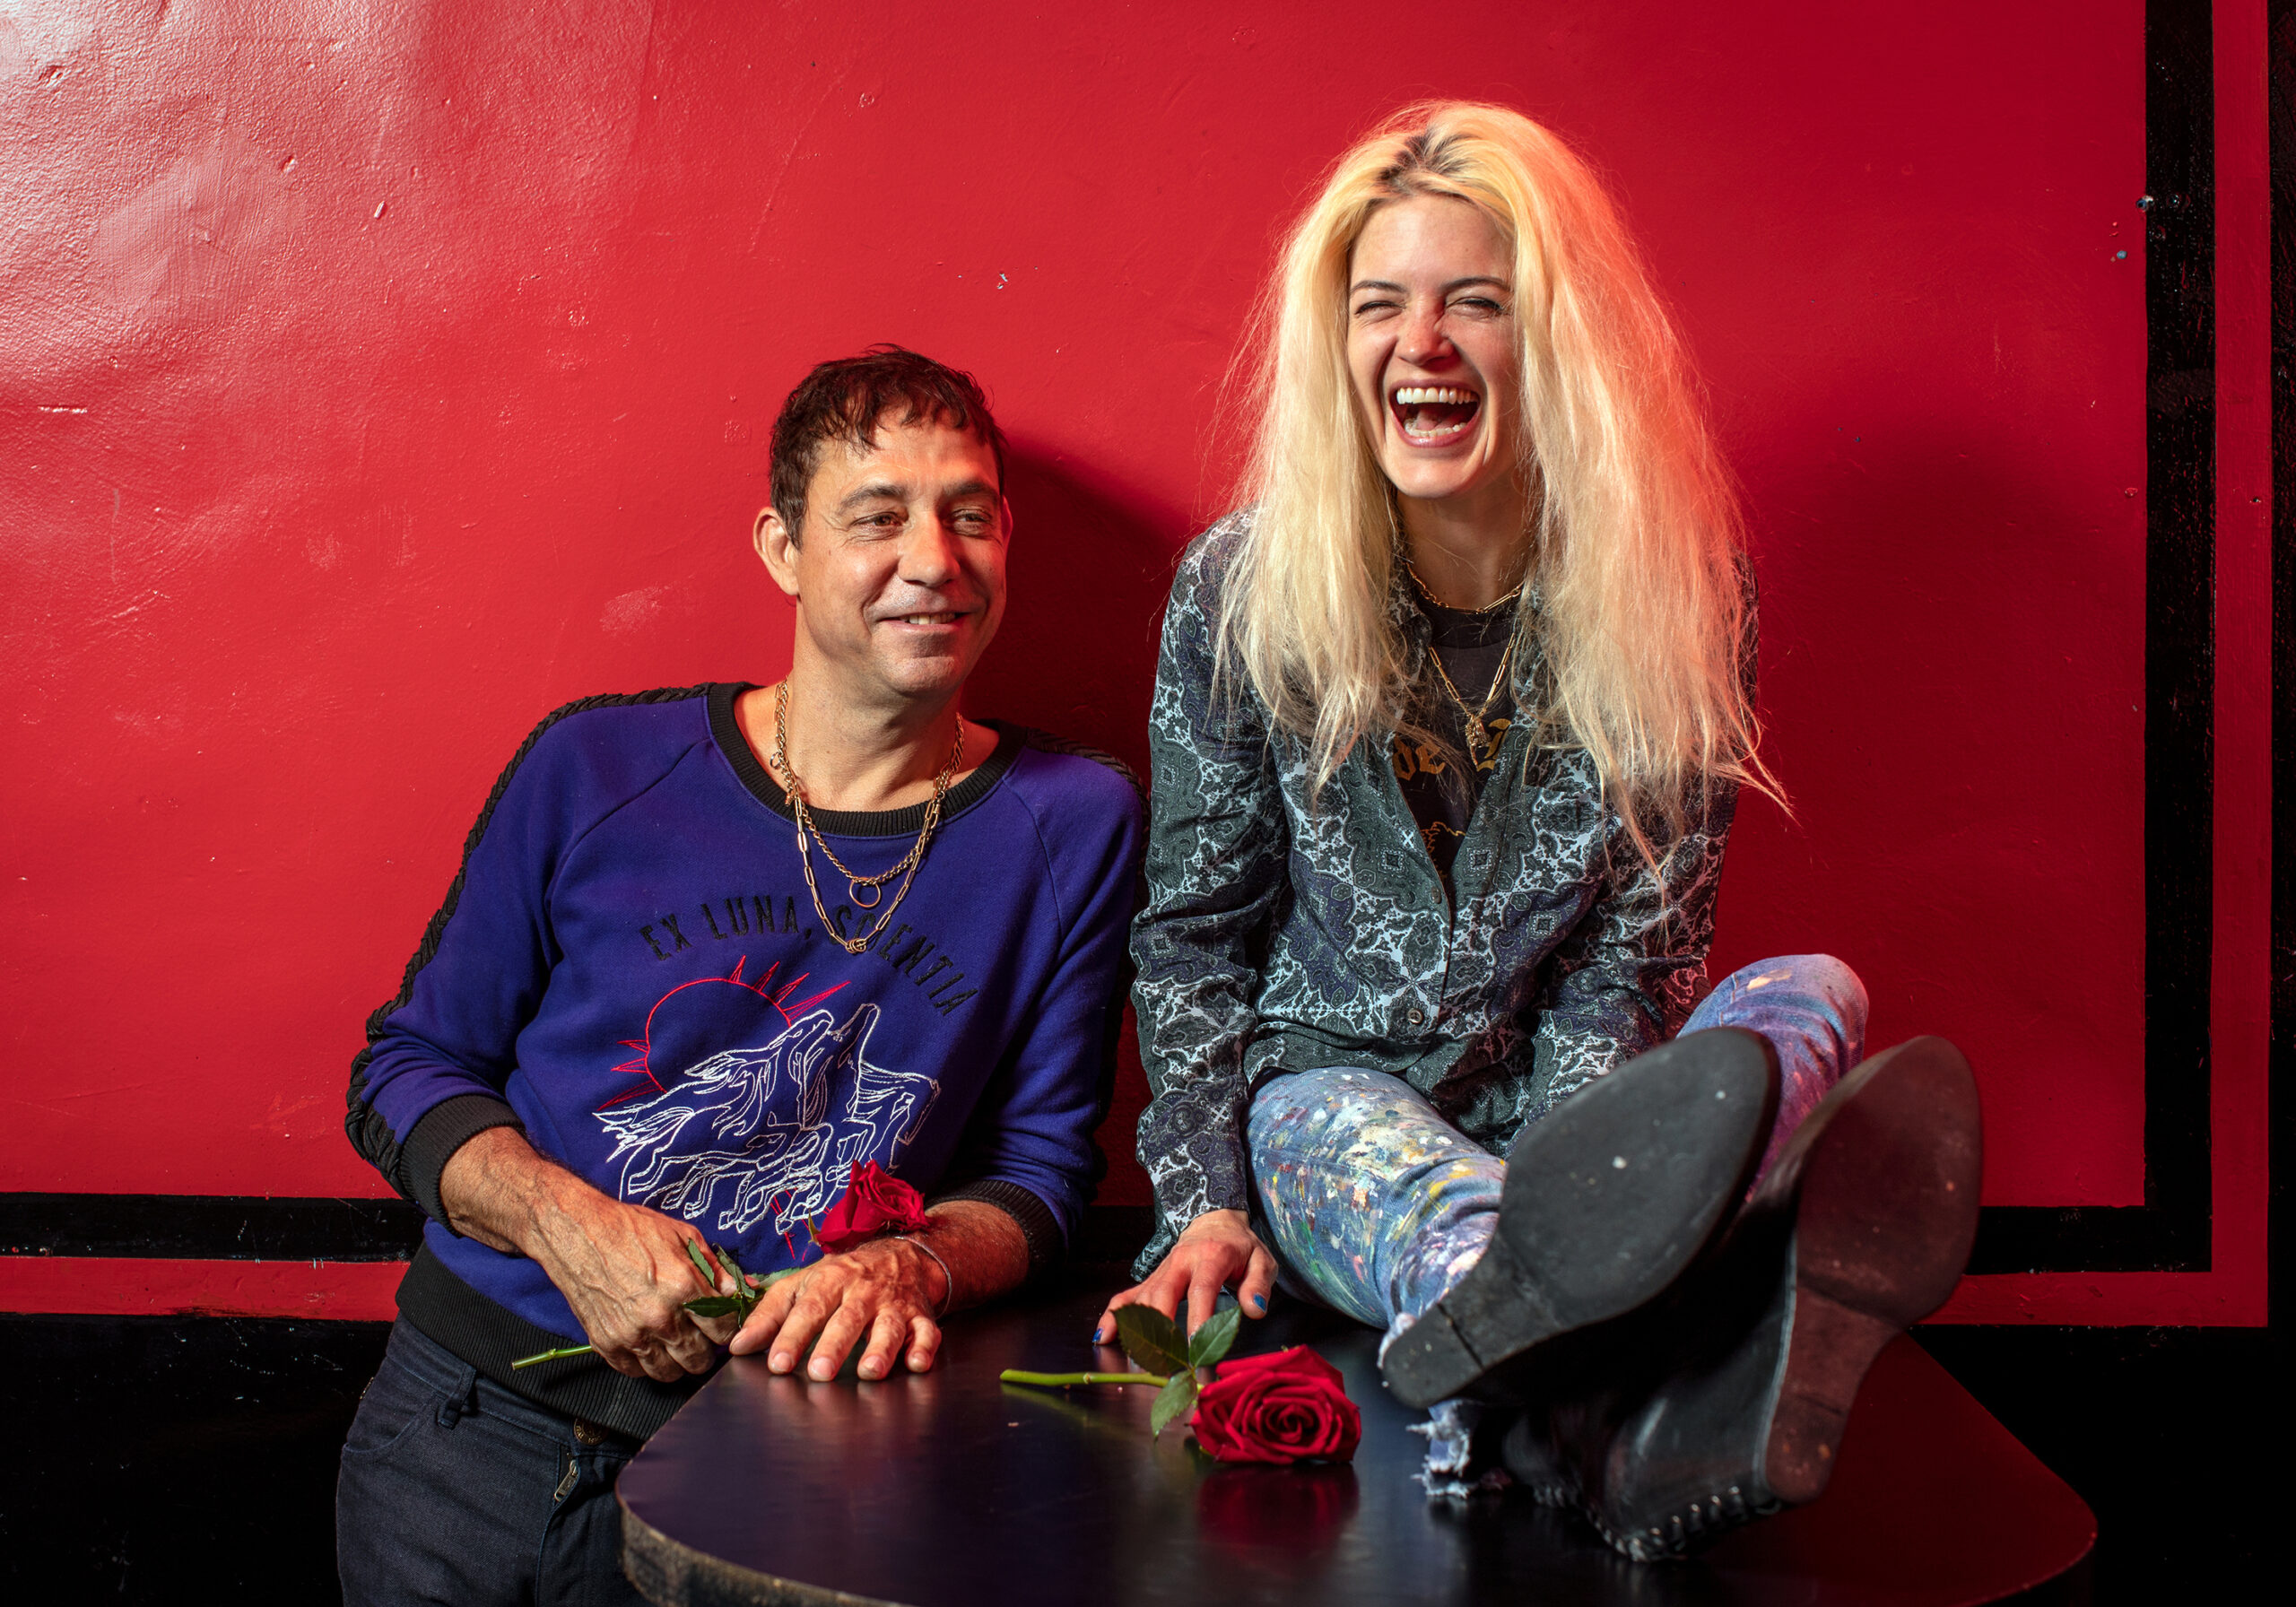 The Kills Return With First New Music Since 2018